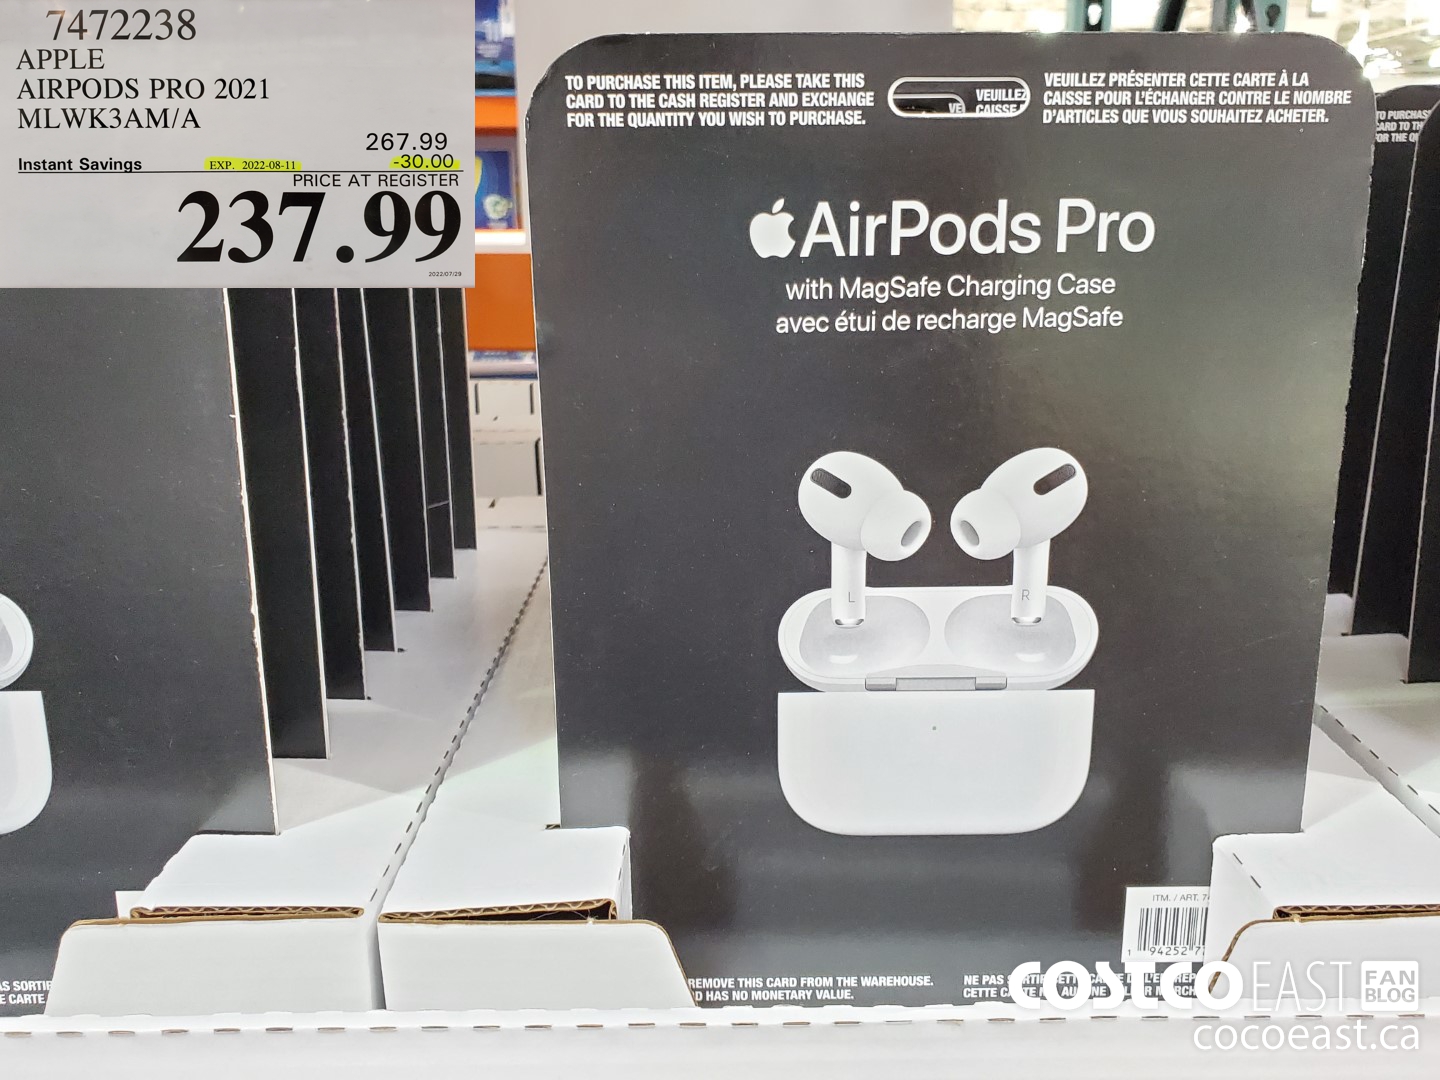 7472238 APPLE AIRPODS PRO 2021 MLWK3AM A 30 00 INSTANT SAVINGS 